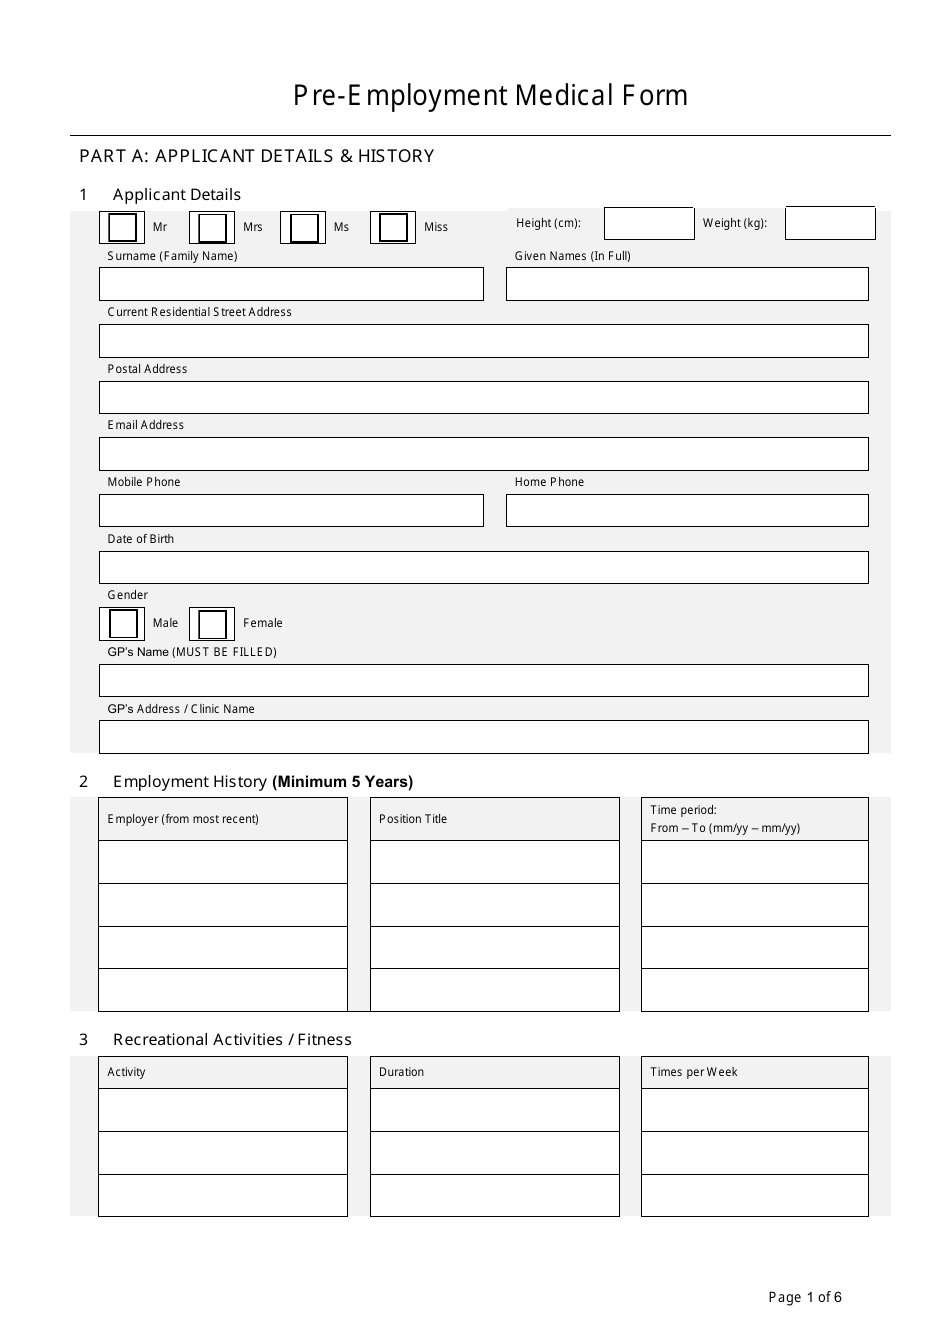 Pre-employment Medical Form, Page 1